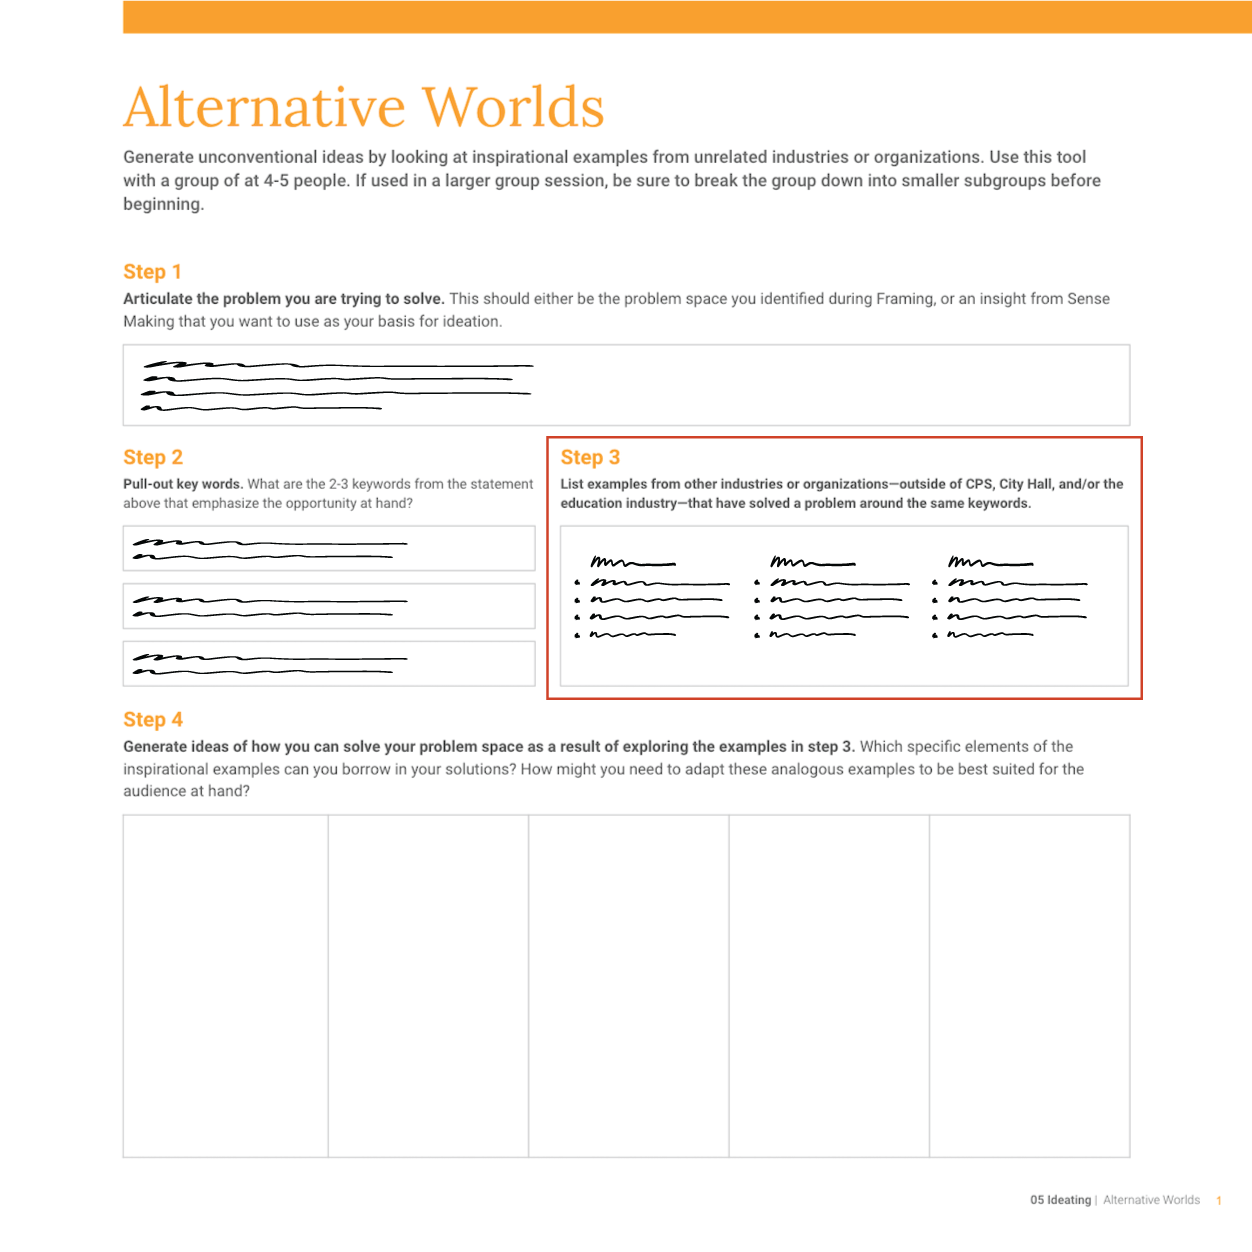 Alternative-Worlds worksheet with part 3 filled in